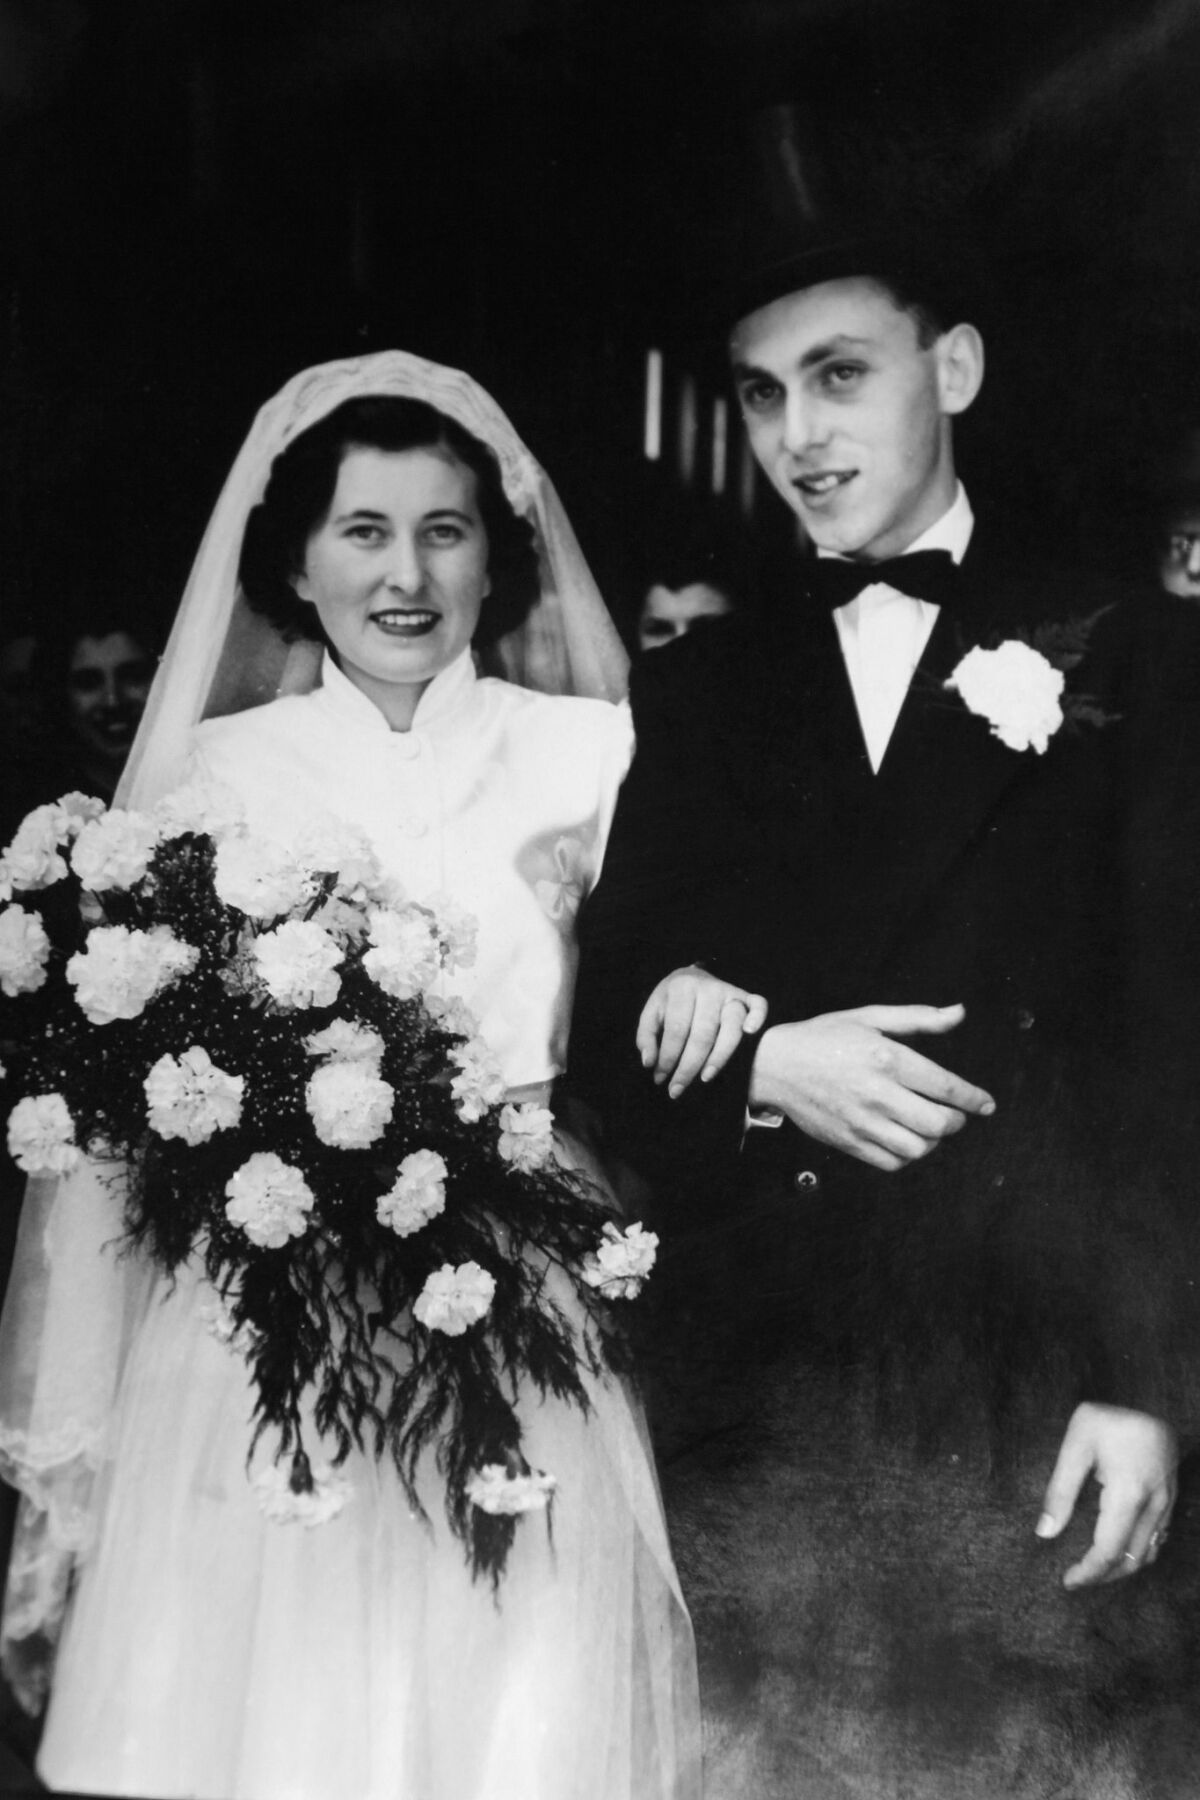 Max and Rose Schindler on their wedding day, July 27, 1950.